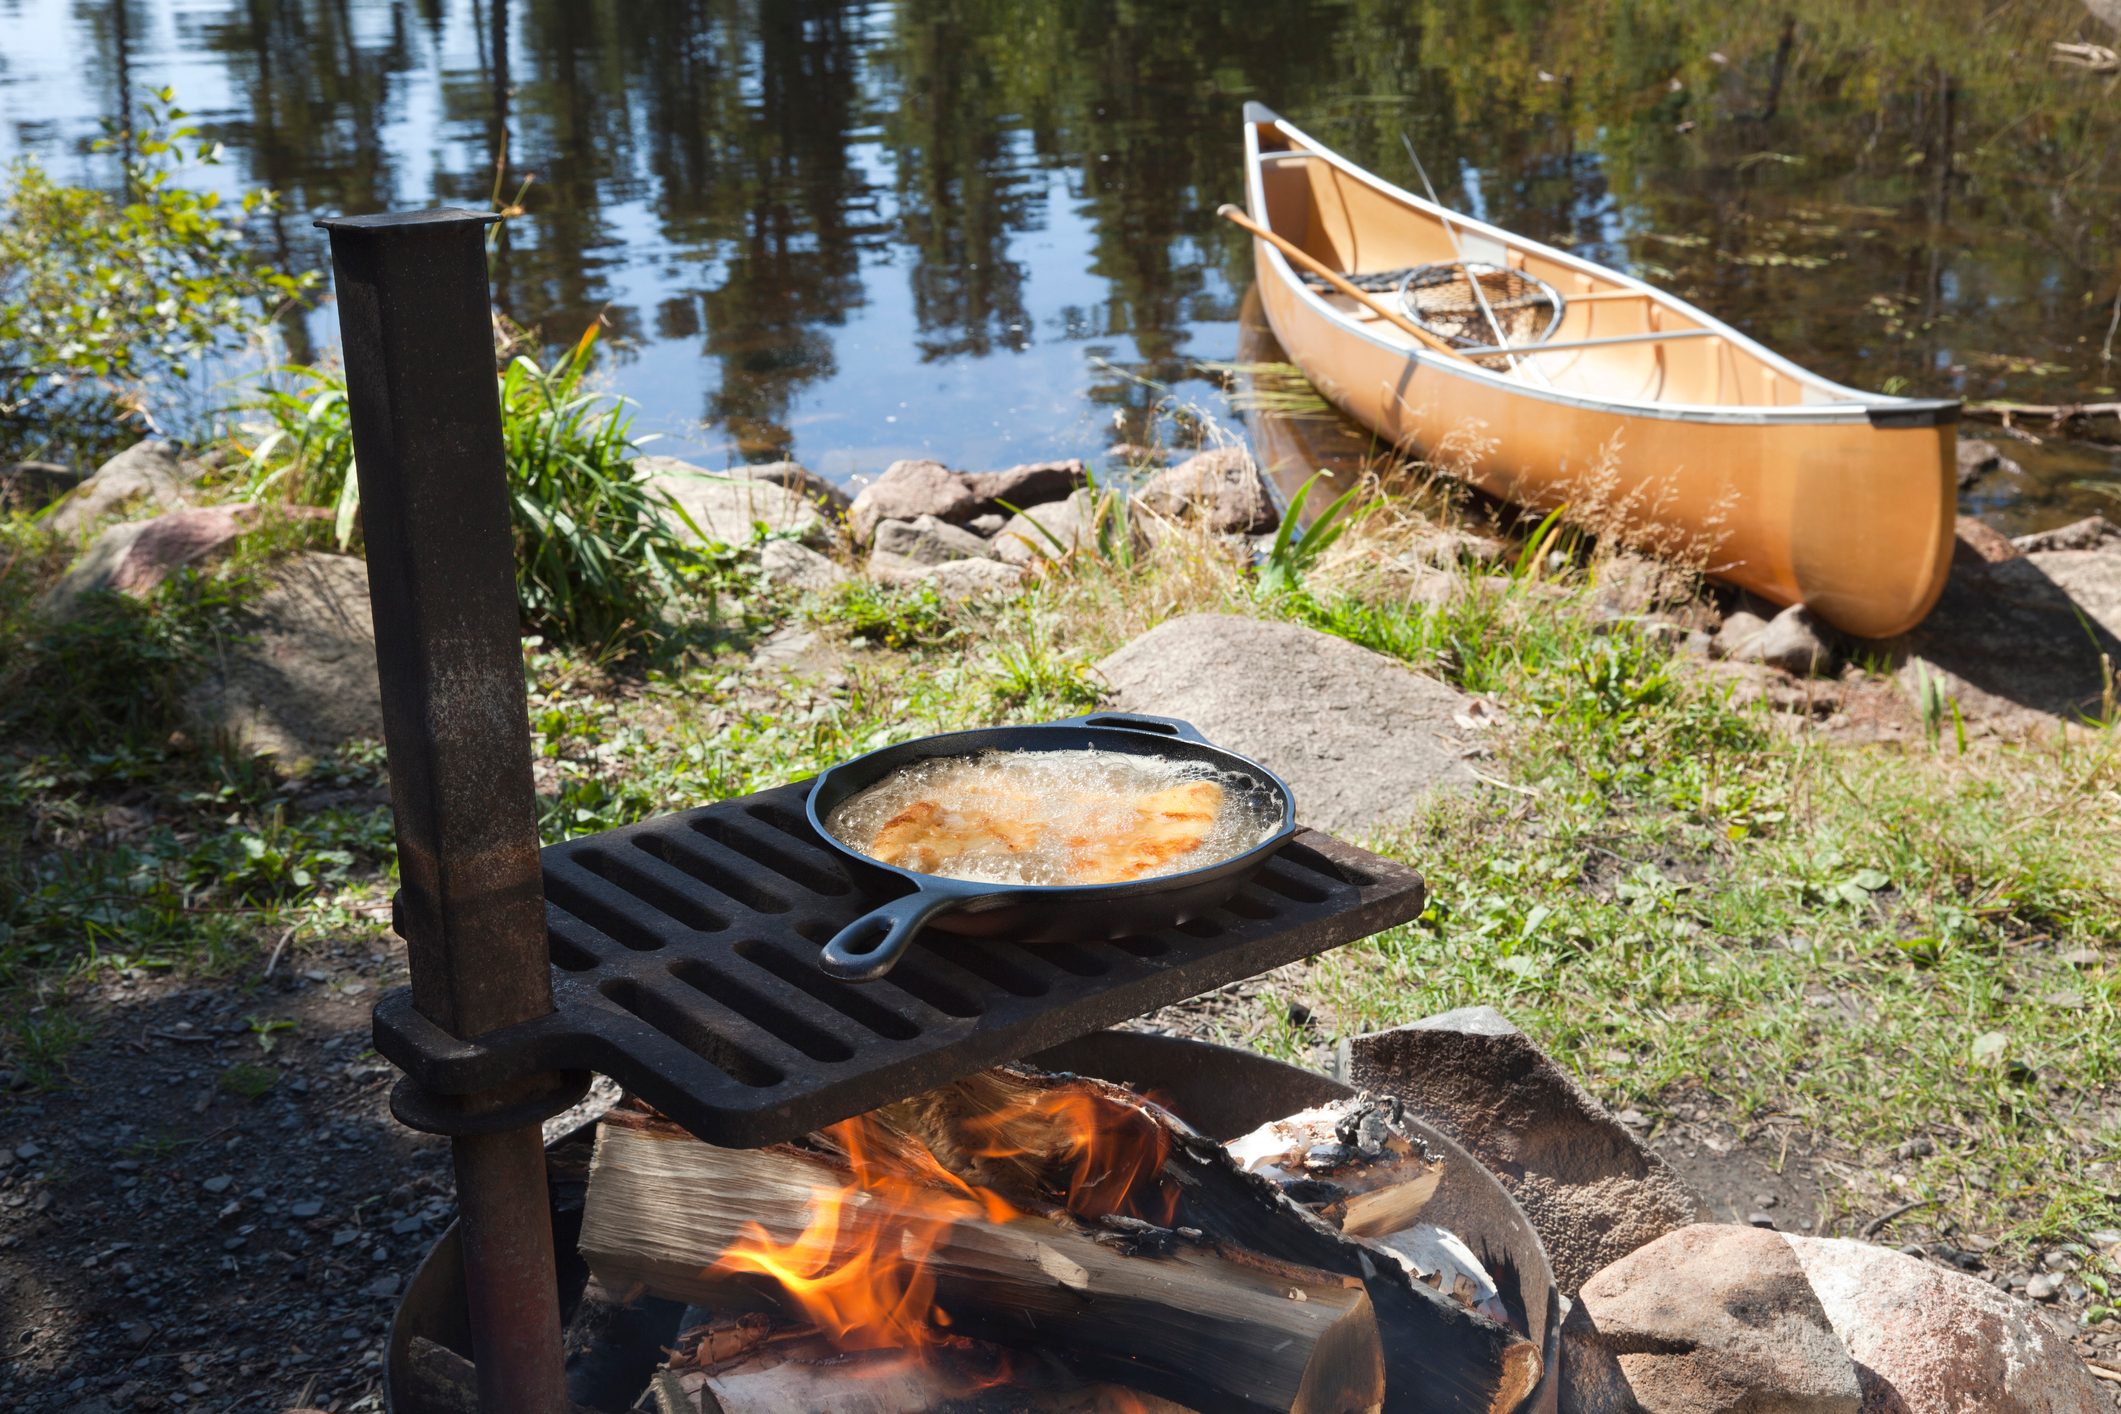 HOW-TO MAKE CAST-IRON FISH & CHIPS WHILE CAMPING